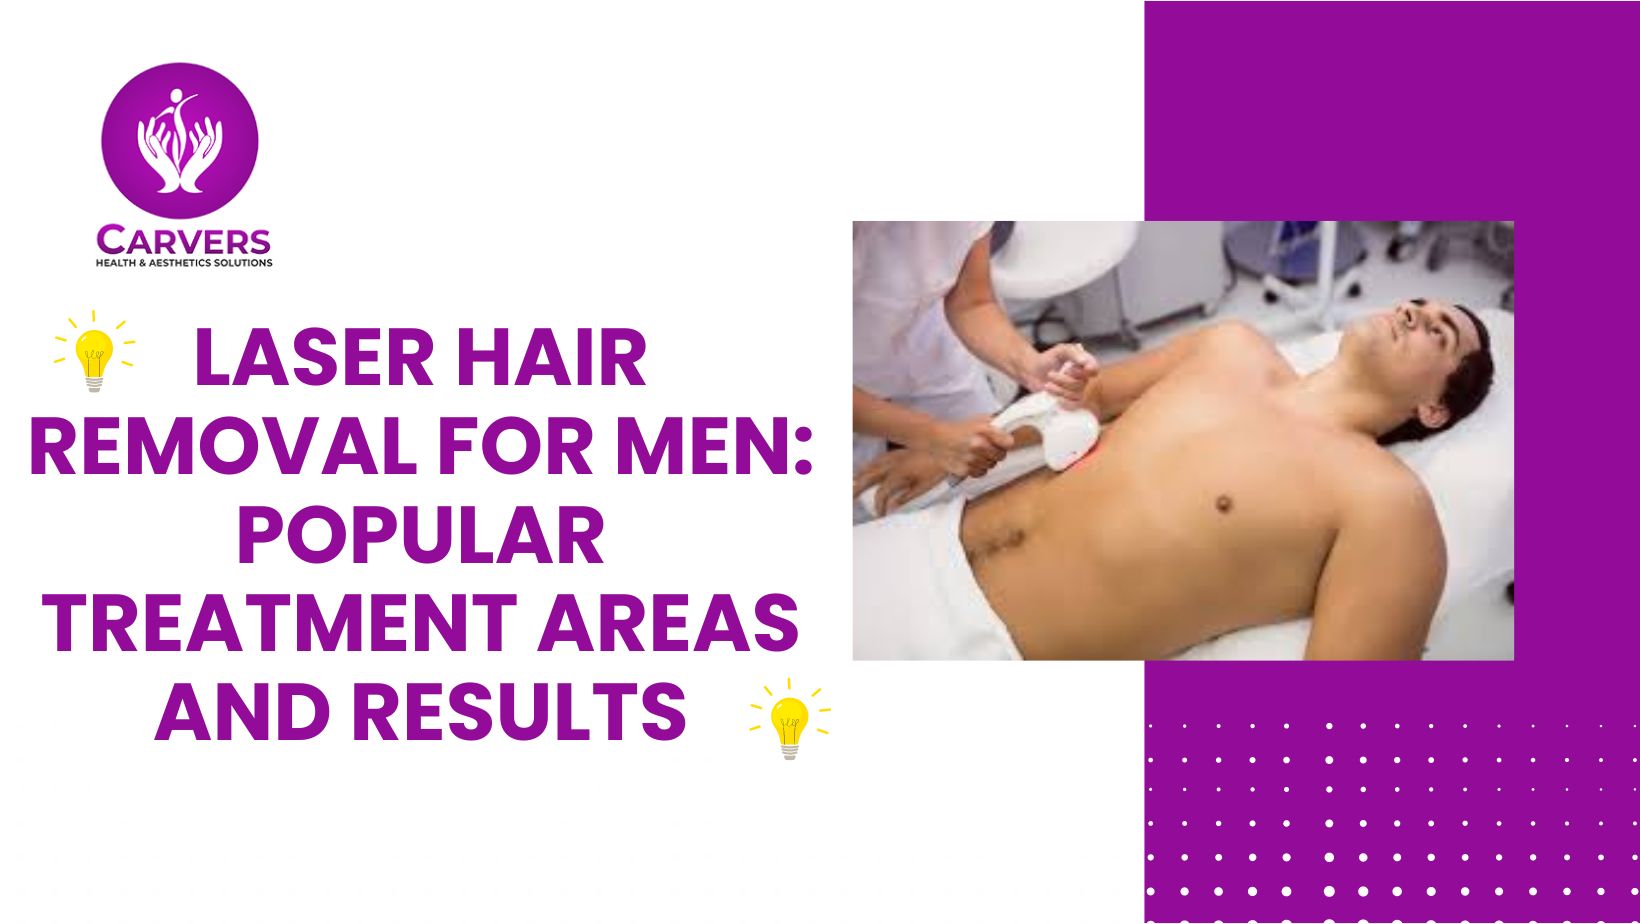 Laser Hair Removal For Men: Popular Treatment Areas And Results